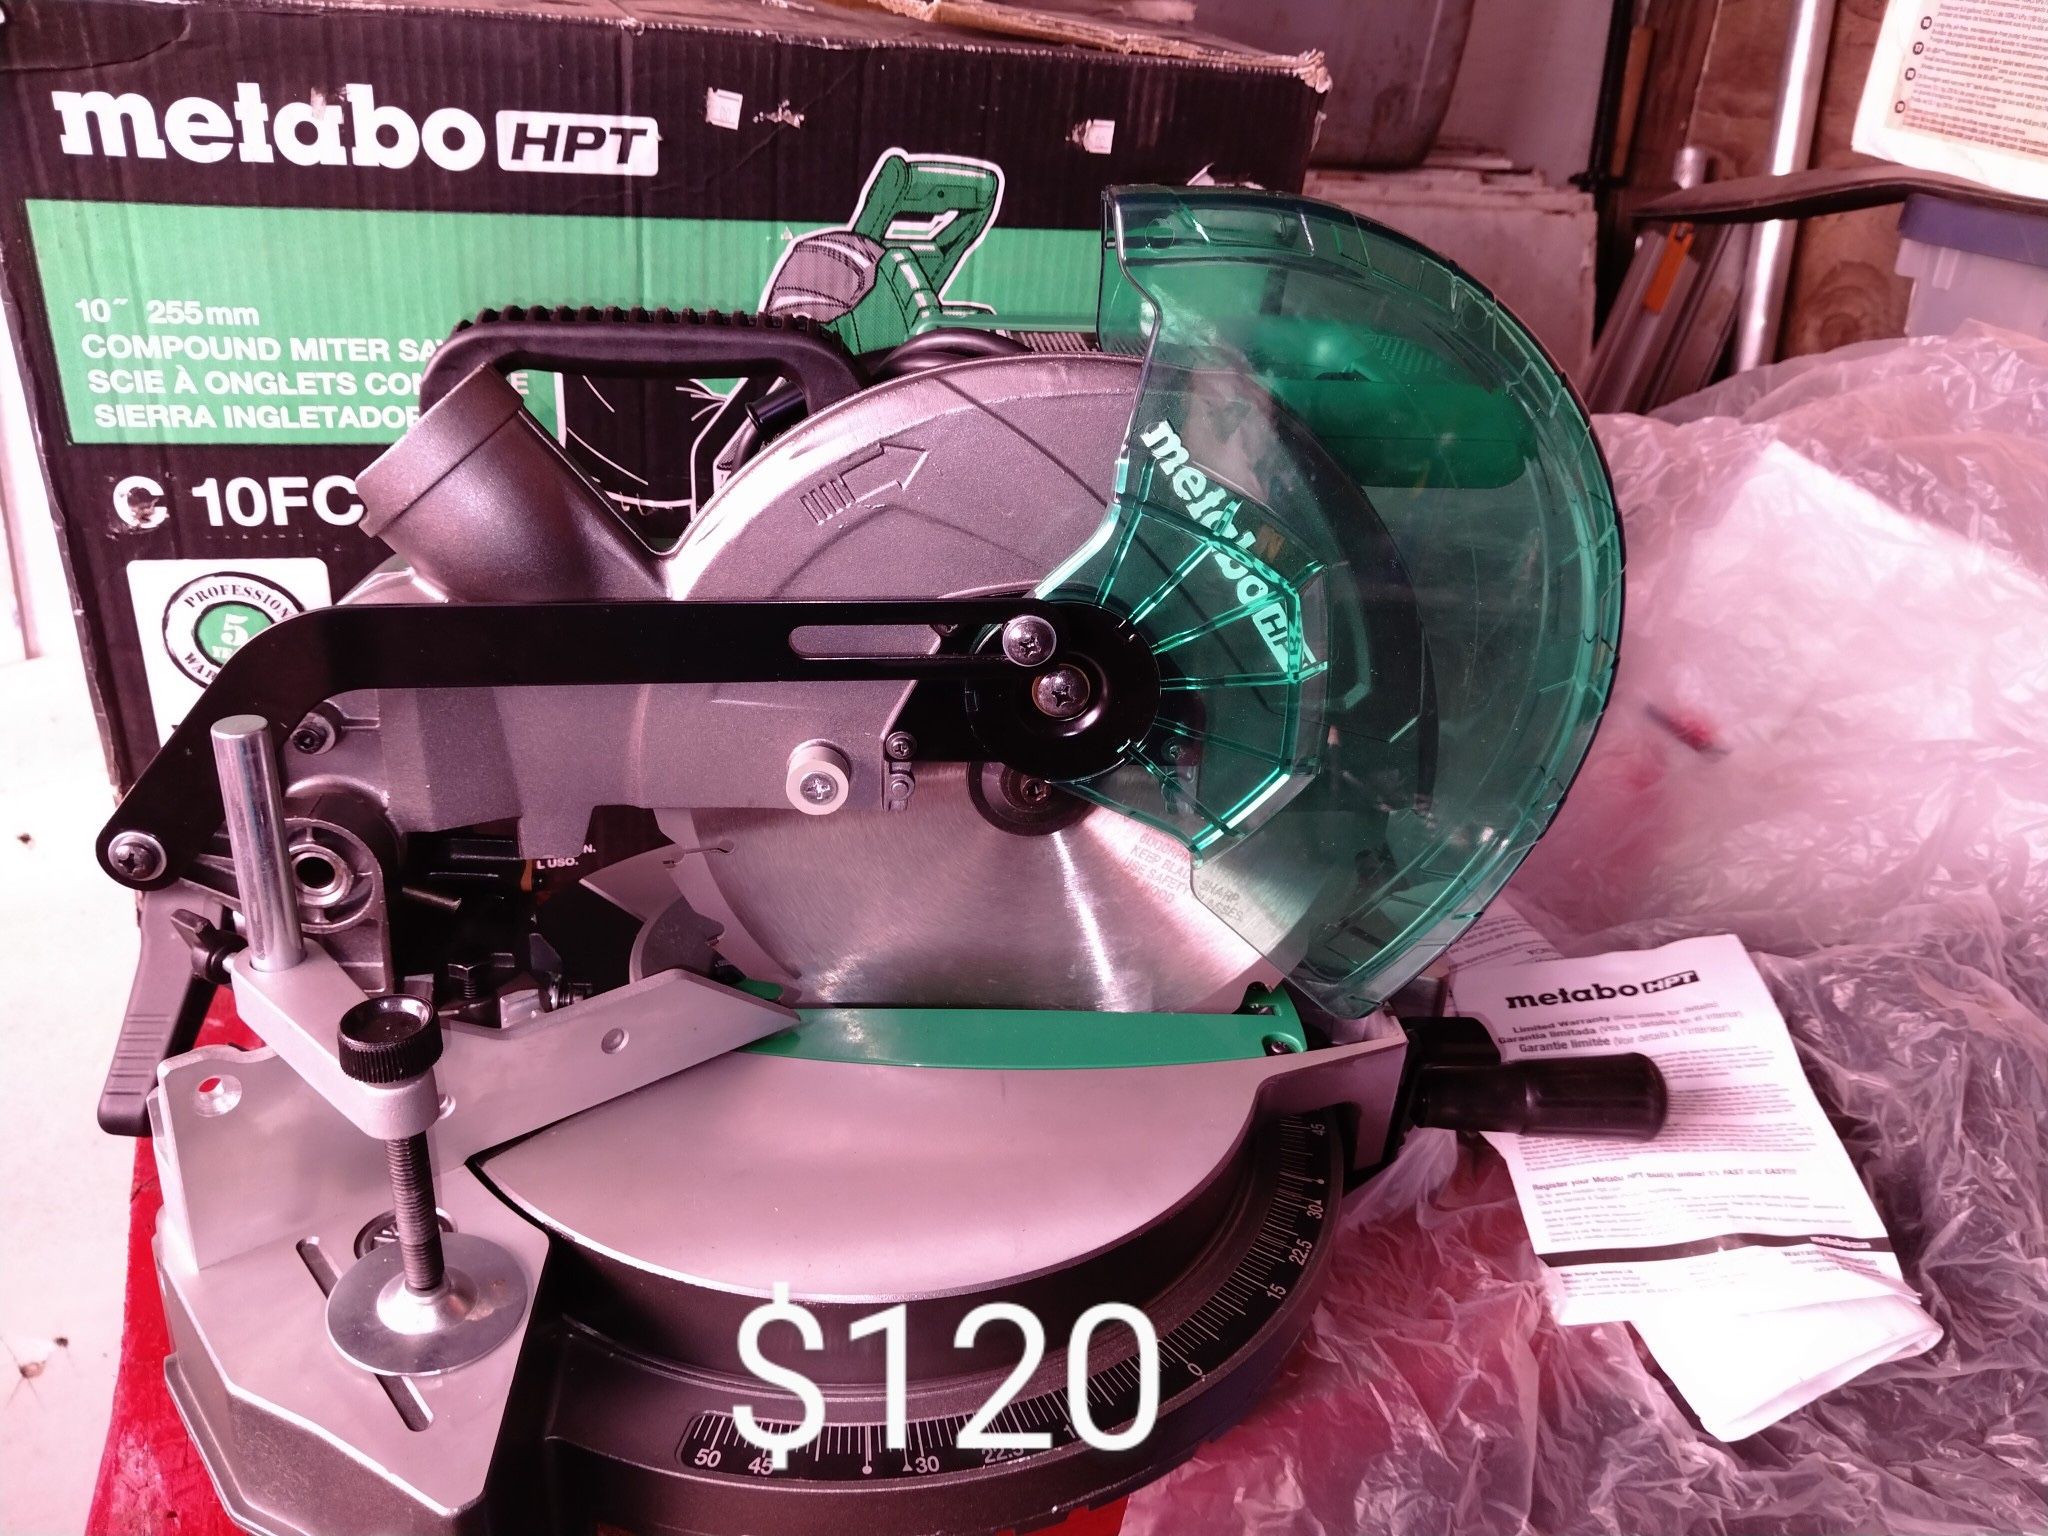 Metabo HPT Compound Mitter Saw 